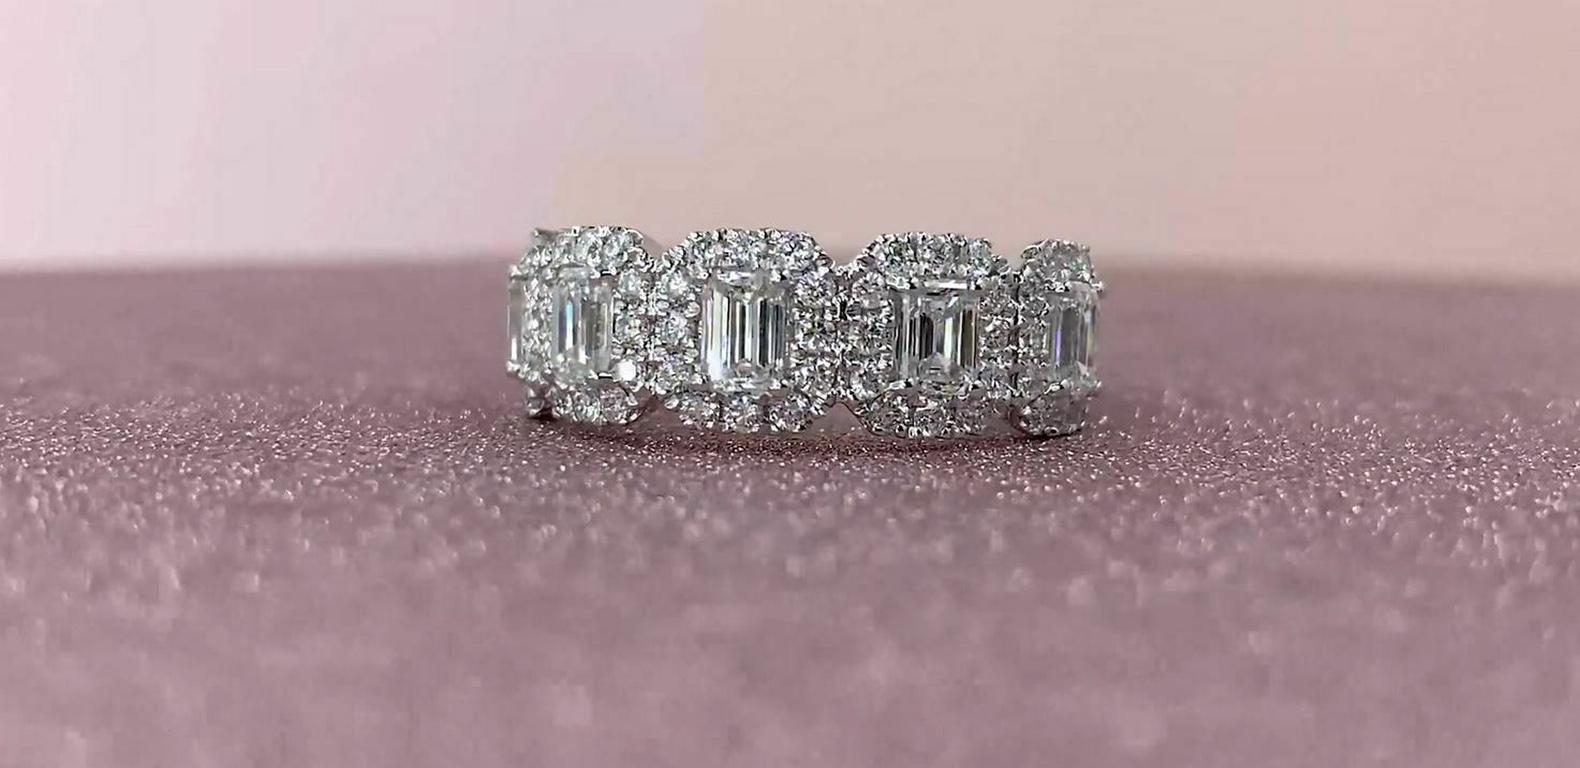 Emerald cut diamonds (1.06 total carat weight) and round diamonds (0.60 total carat weight) half-eternity engagement ring in 14k white gold. The ring is designed and handmade locally in Los Angeles by Sage Designs L.A. using earth-mined and conflict